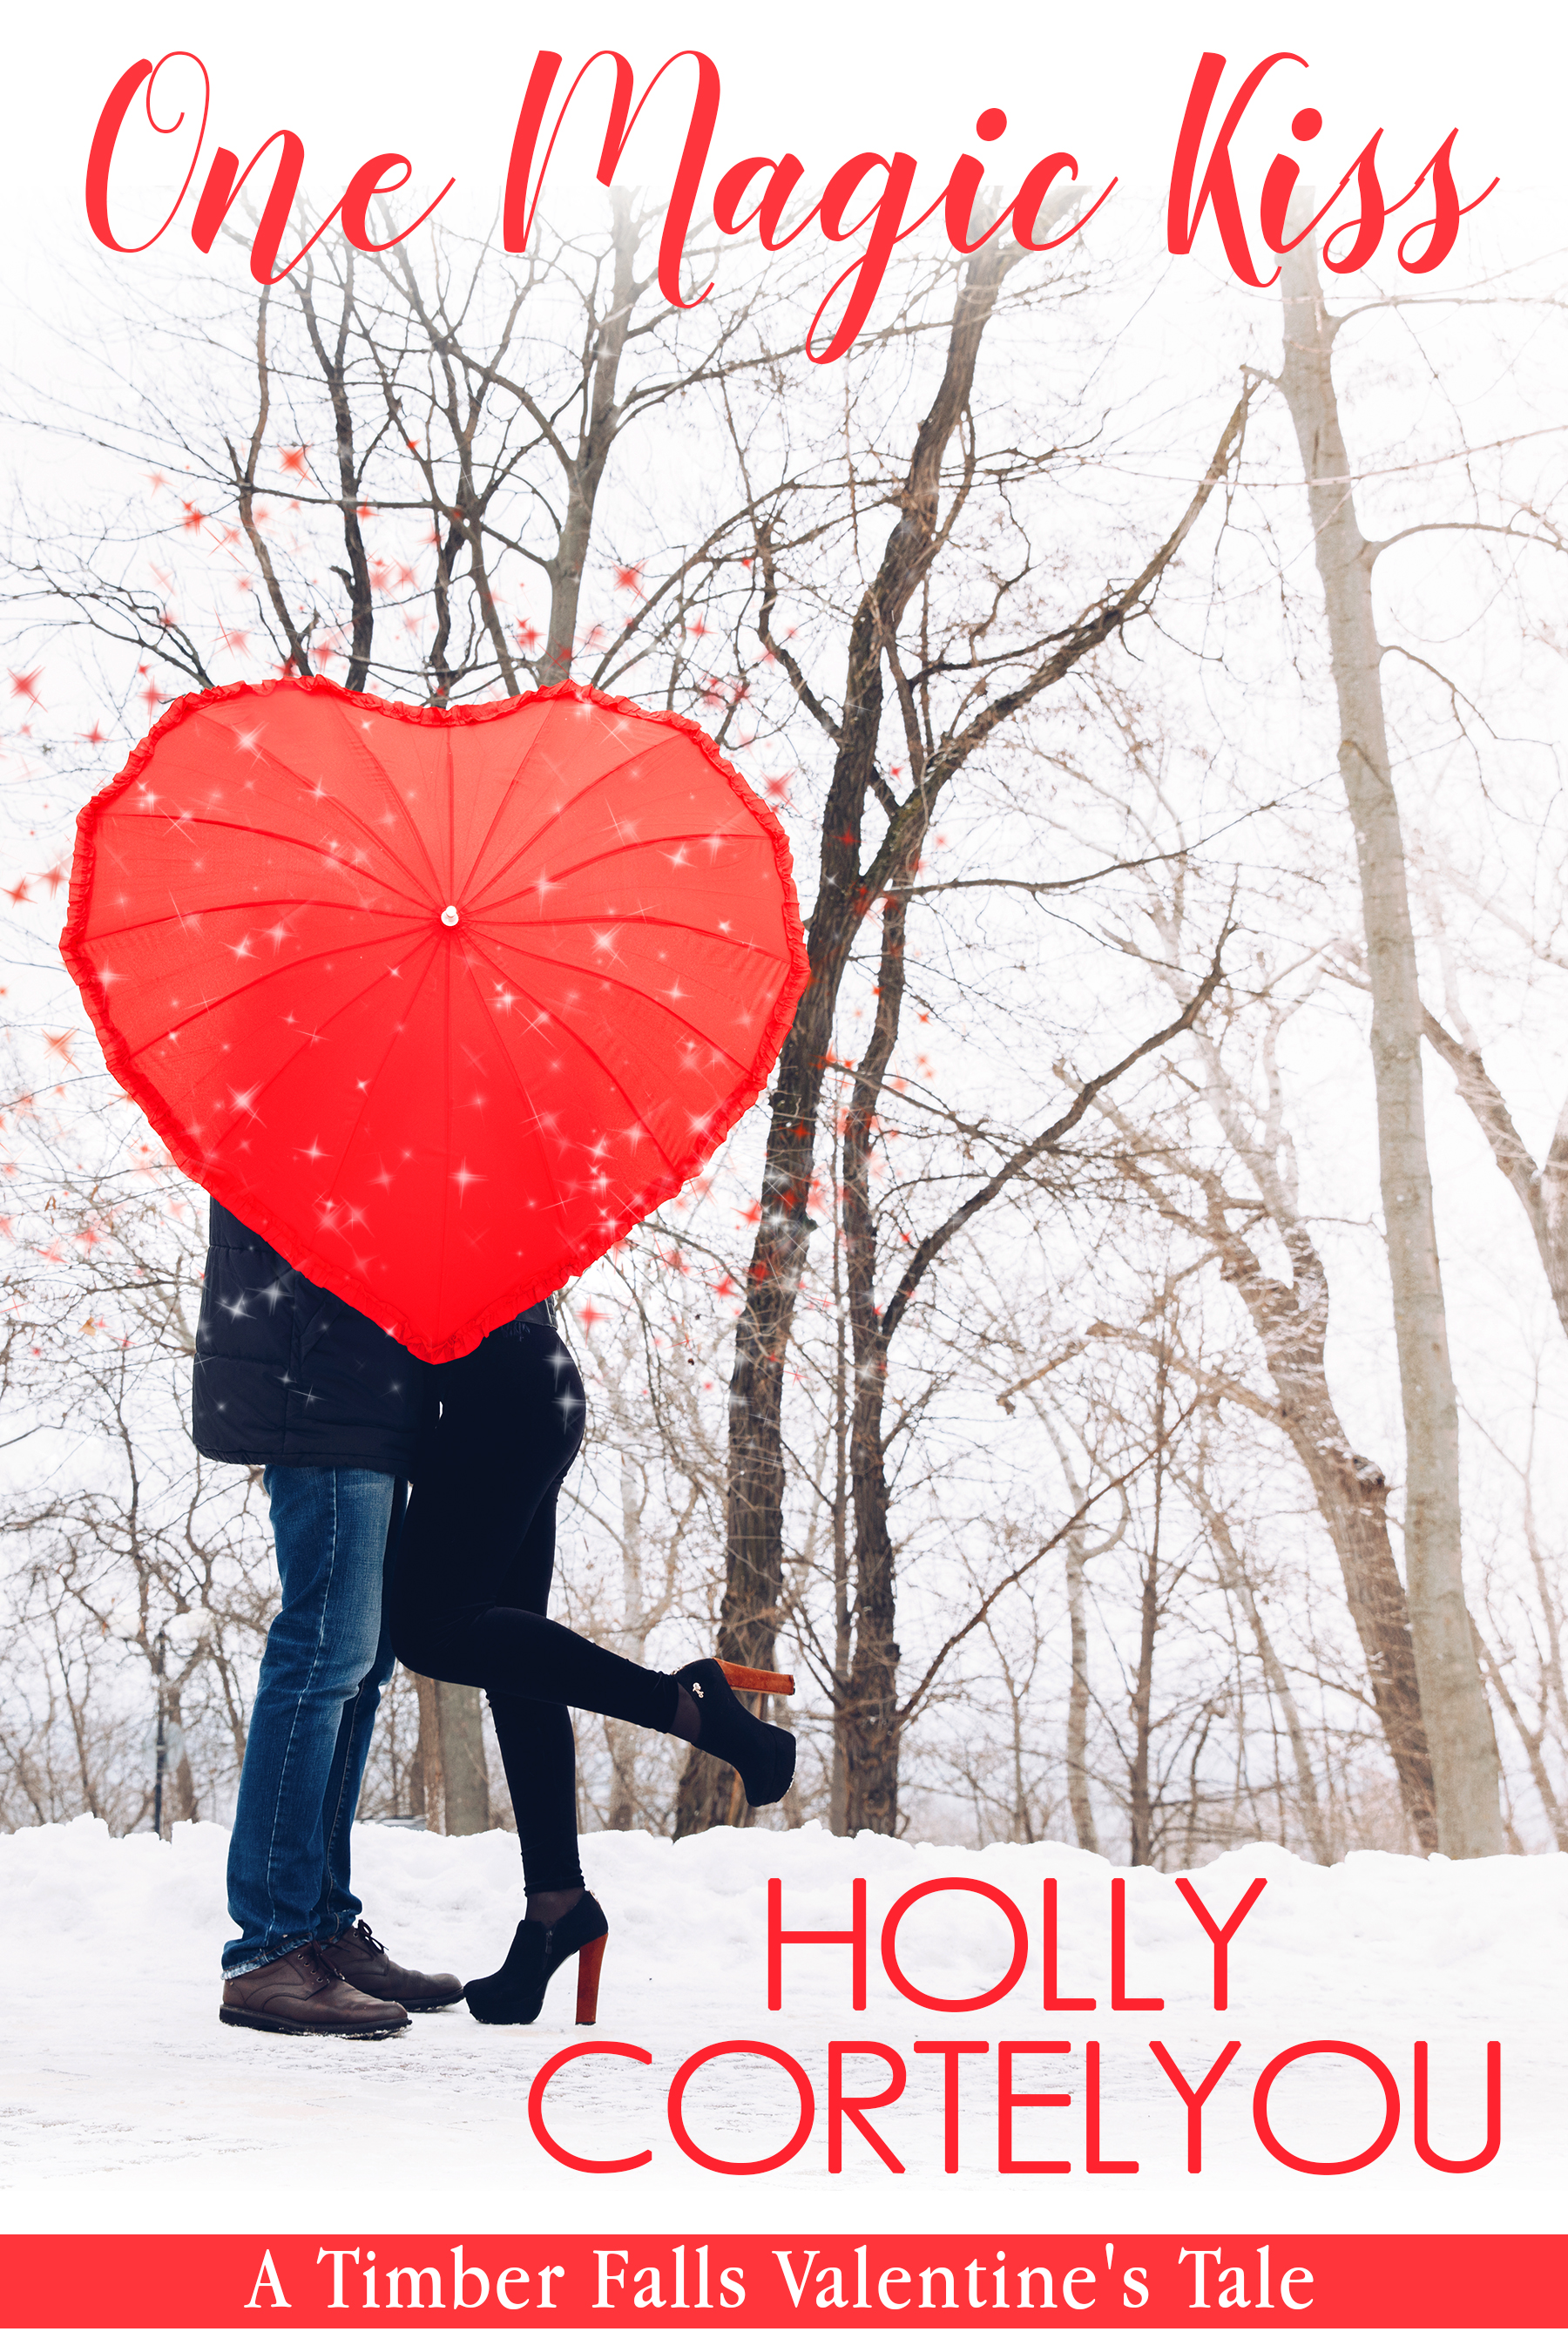 FREE: One Magic Kiss by Holly Cortelyou